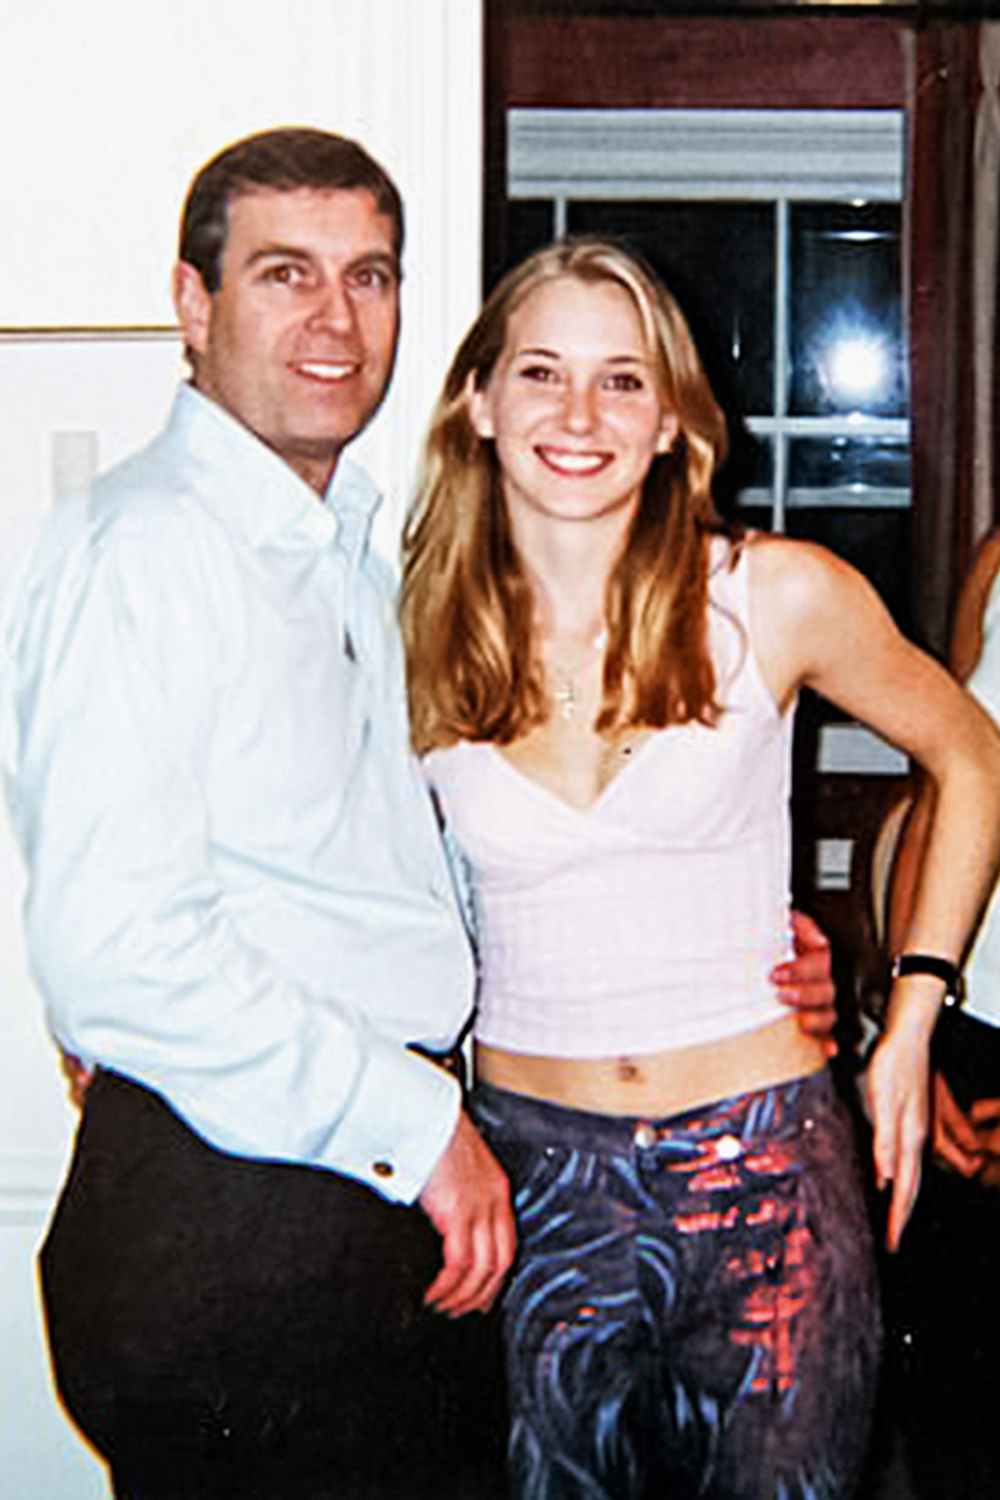 The infamous photograph of Prince Andrew smiling as he stands with his left arm around the waist of a young Virginia Roberts has dogged him for years. It is alleged to have been taken in early 2001